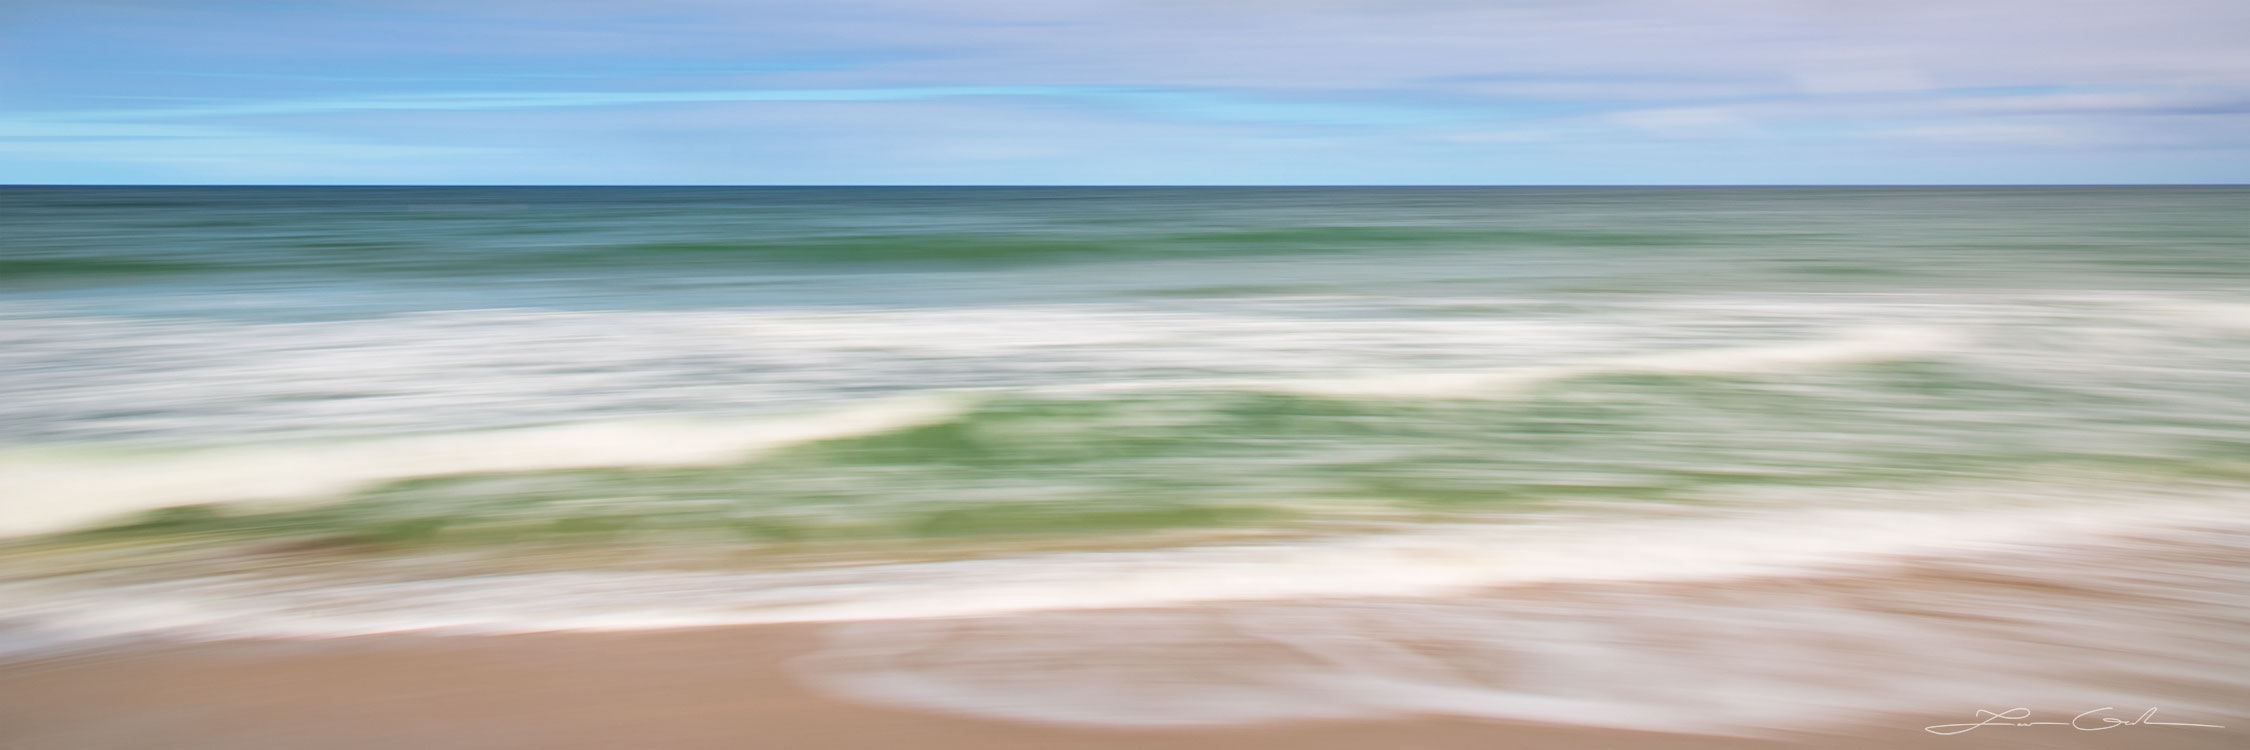 A wavy ocean abstract panoramic photograph - Gintchin Fine Art